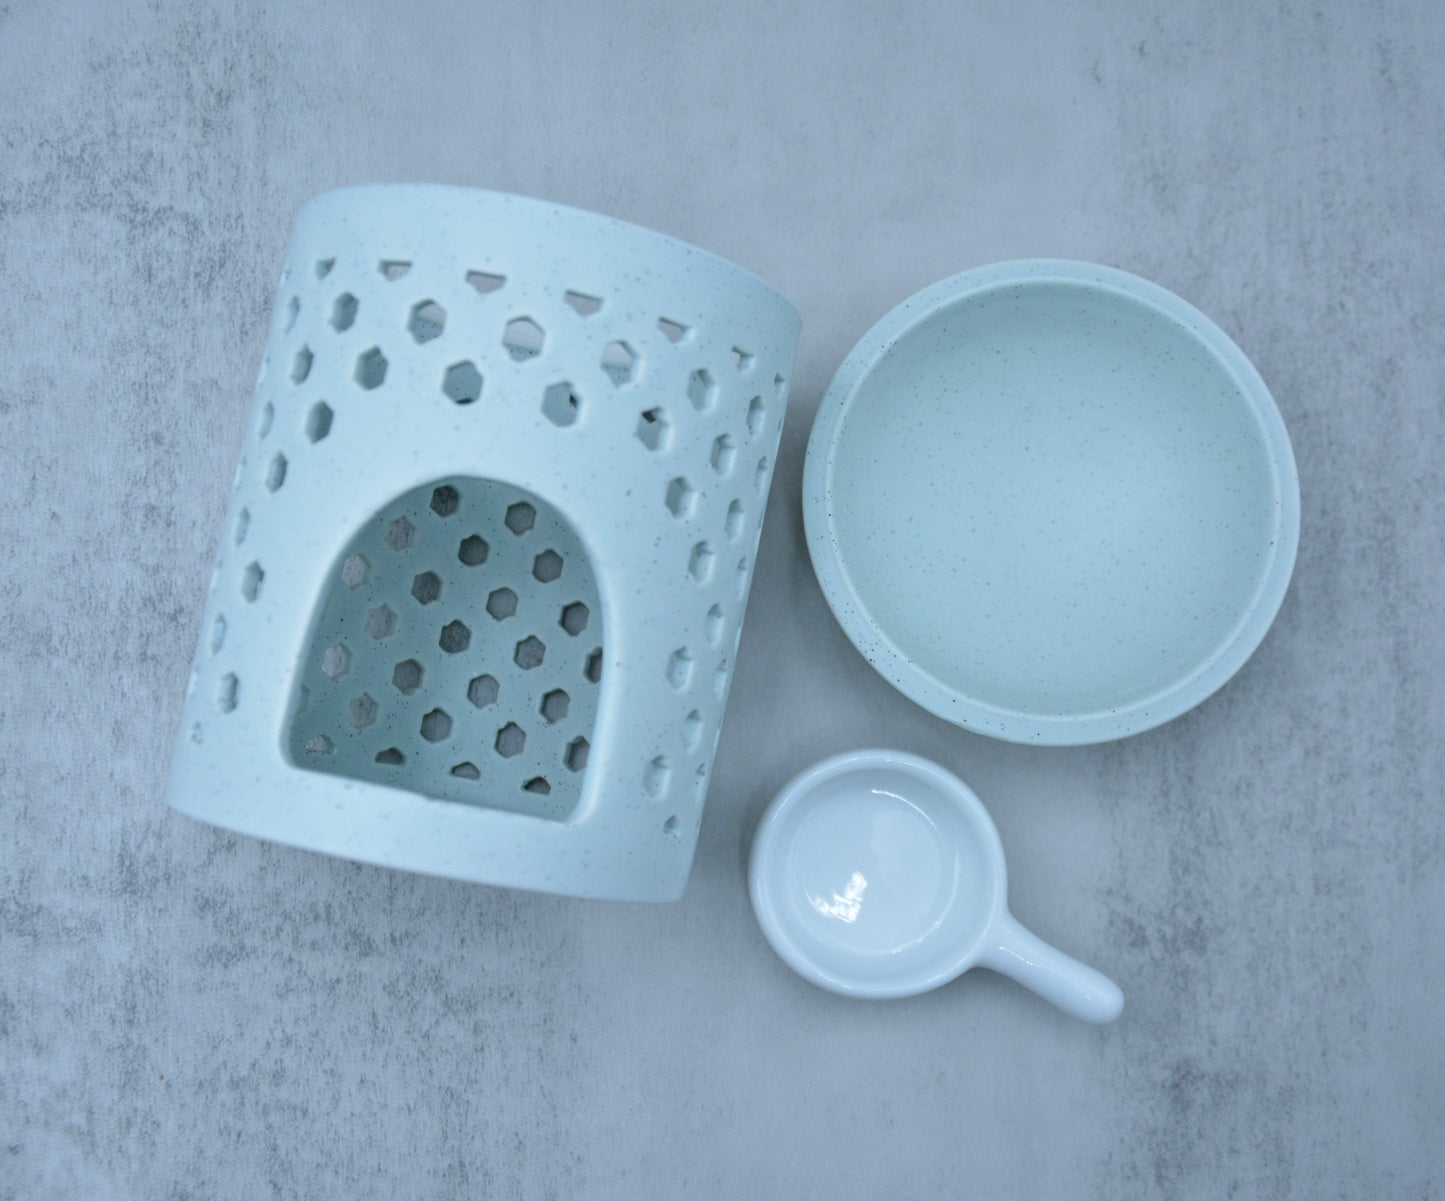 Ceramic Melt Warmer / Essential Oil Diffuser with Free Small Spoon Tea Candle holder